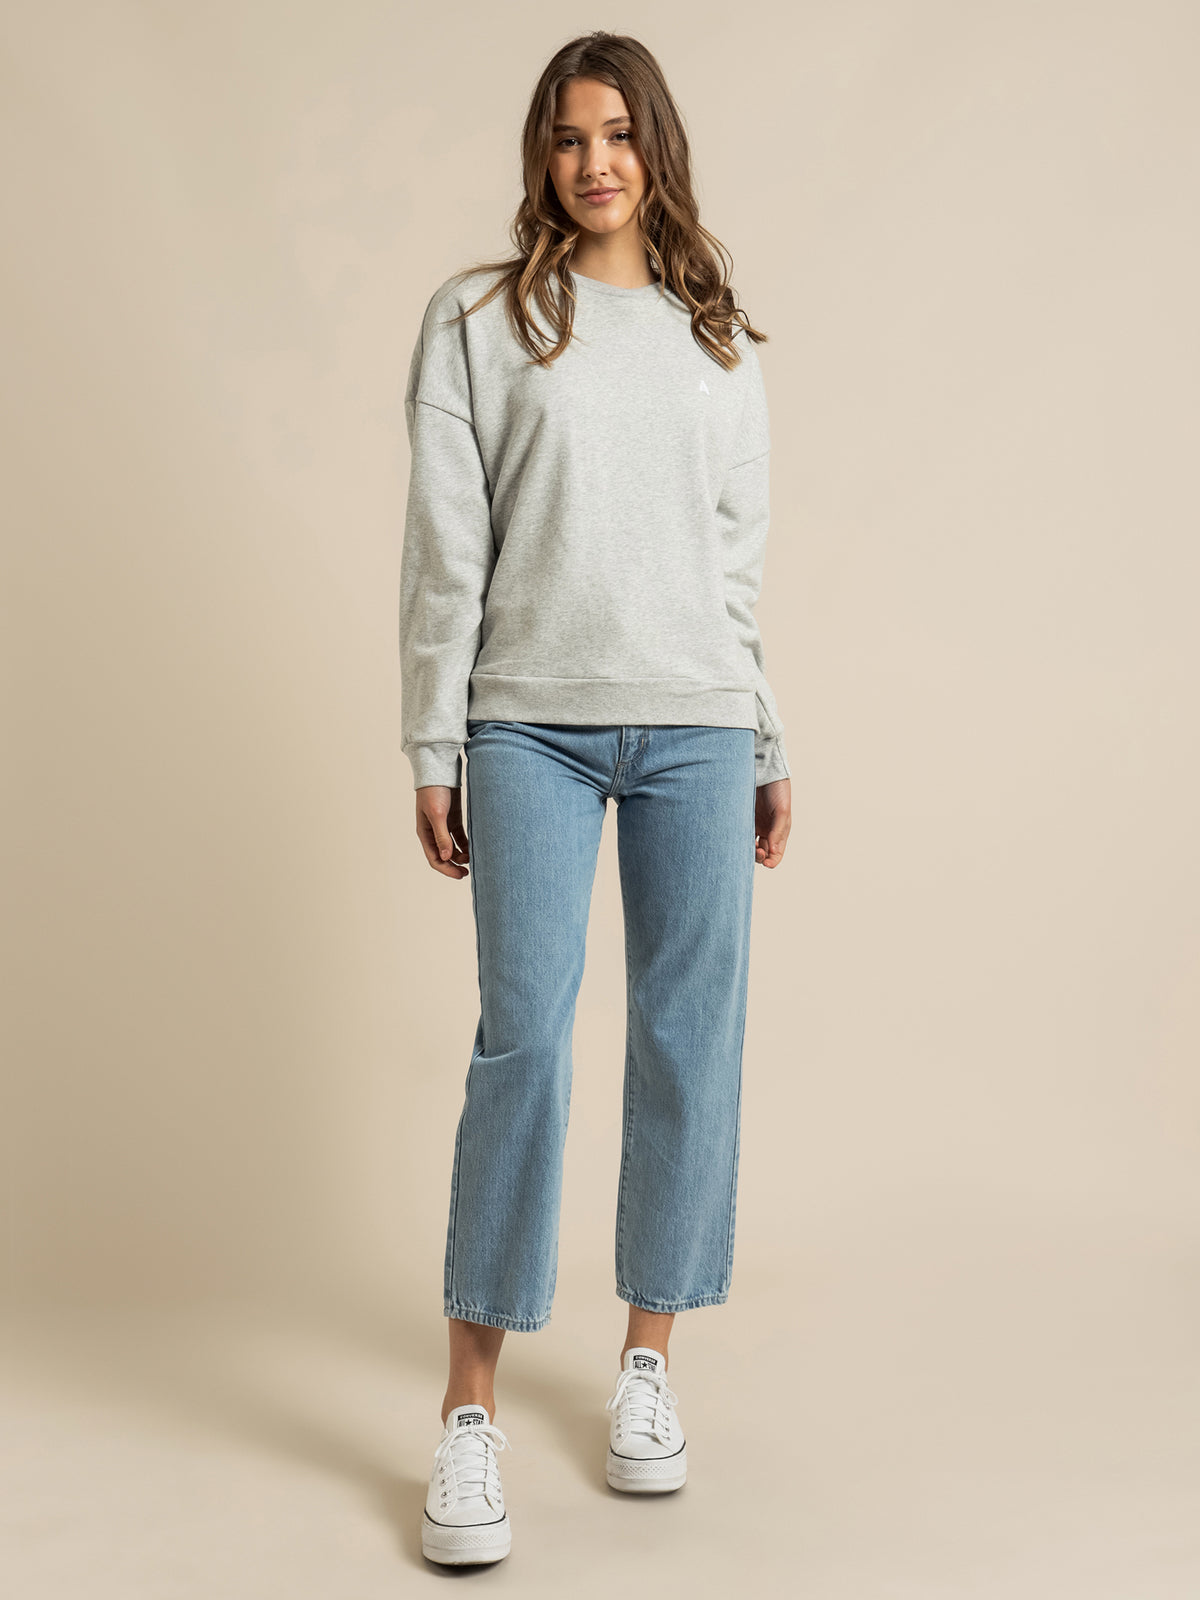 A Oversized Sweater in Grey Marle